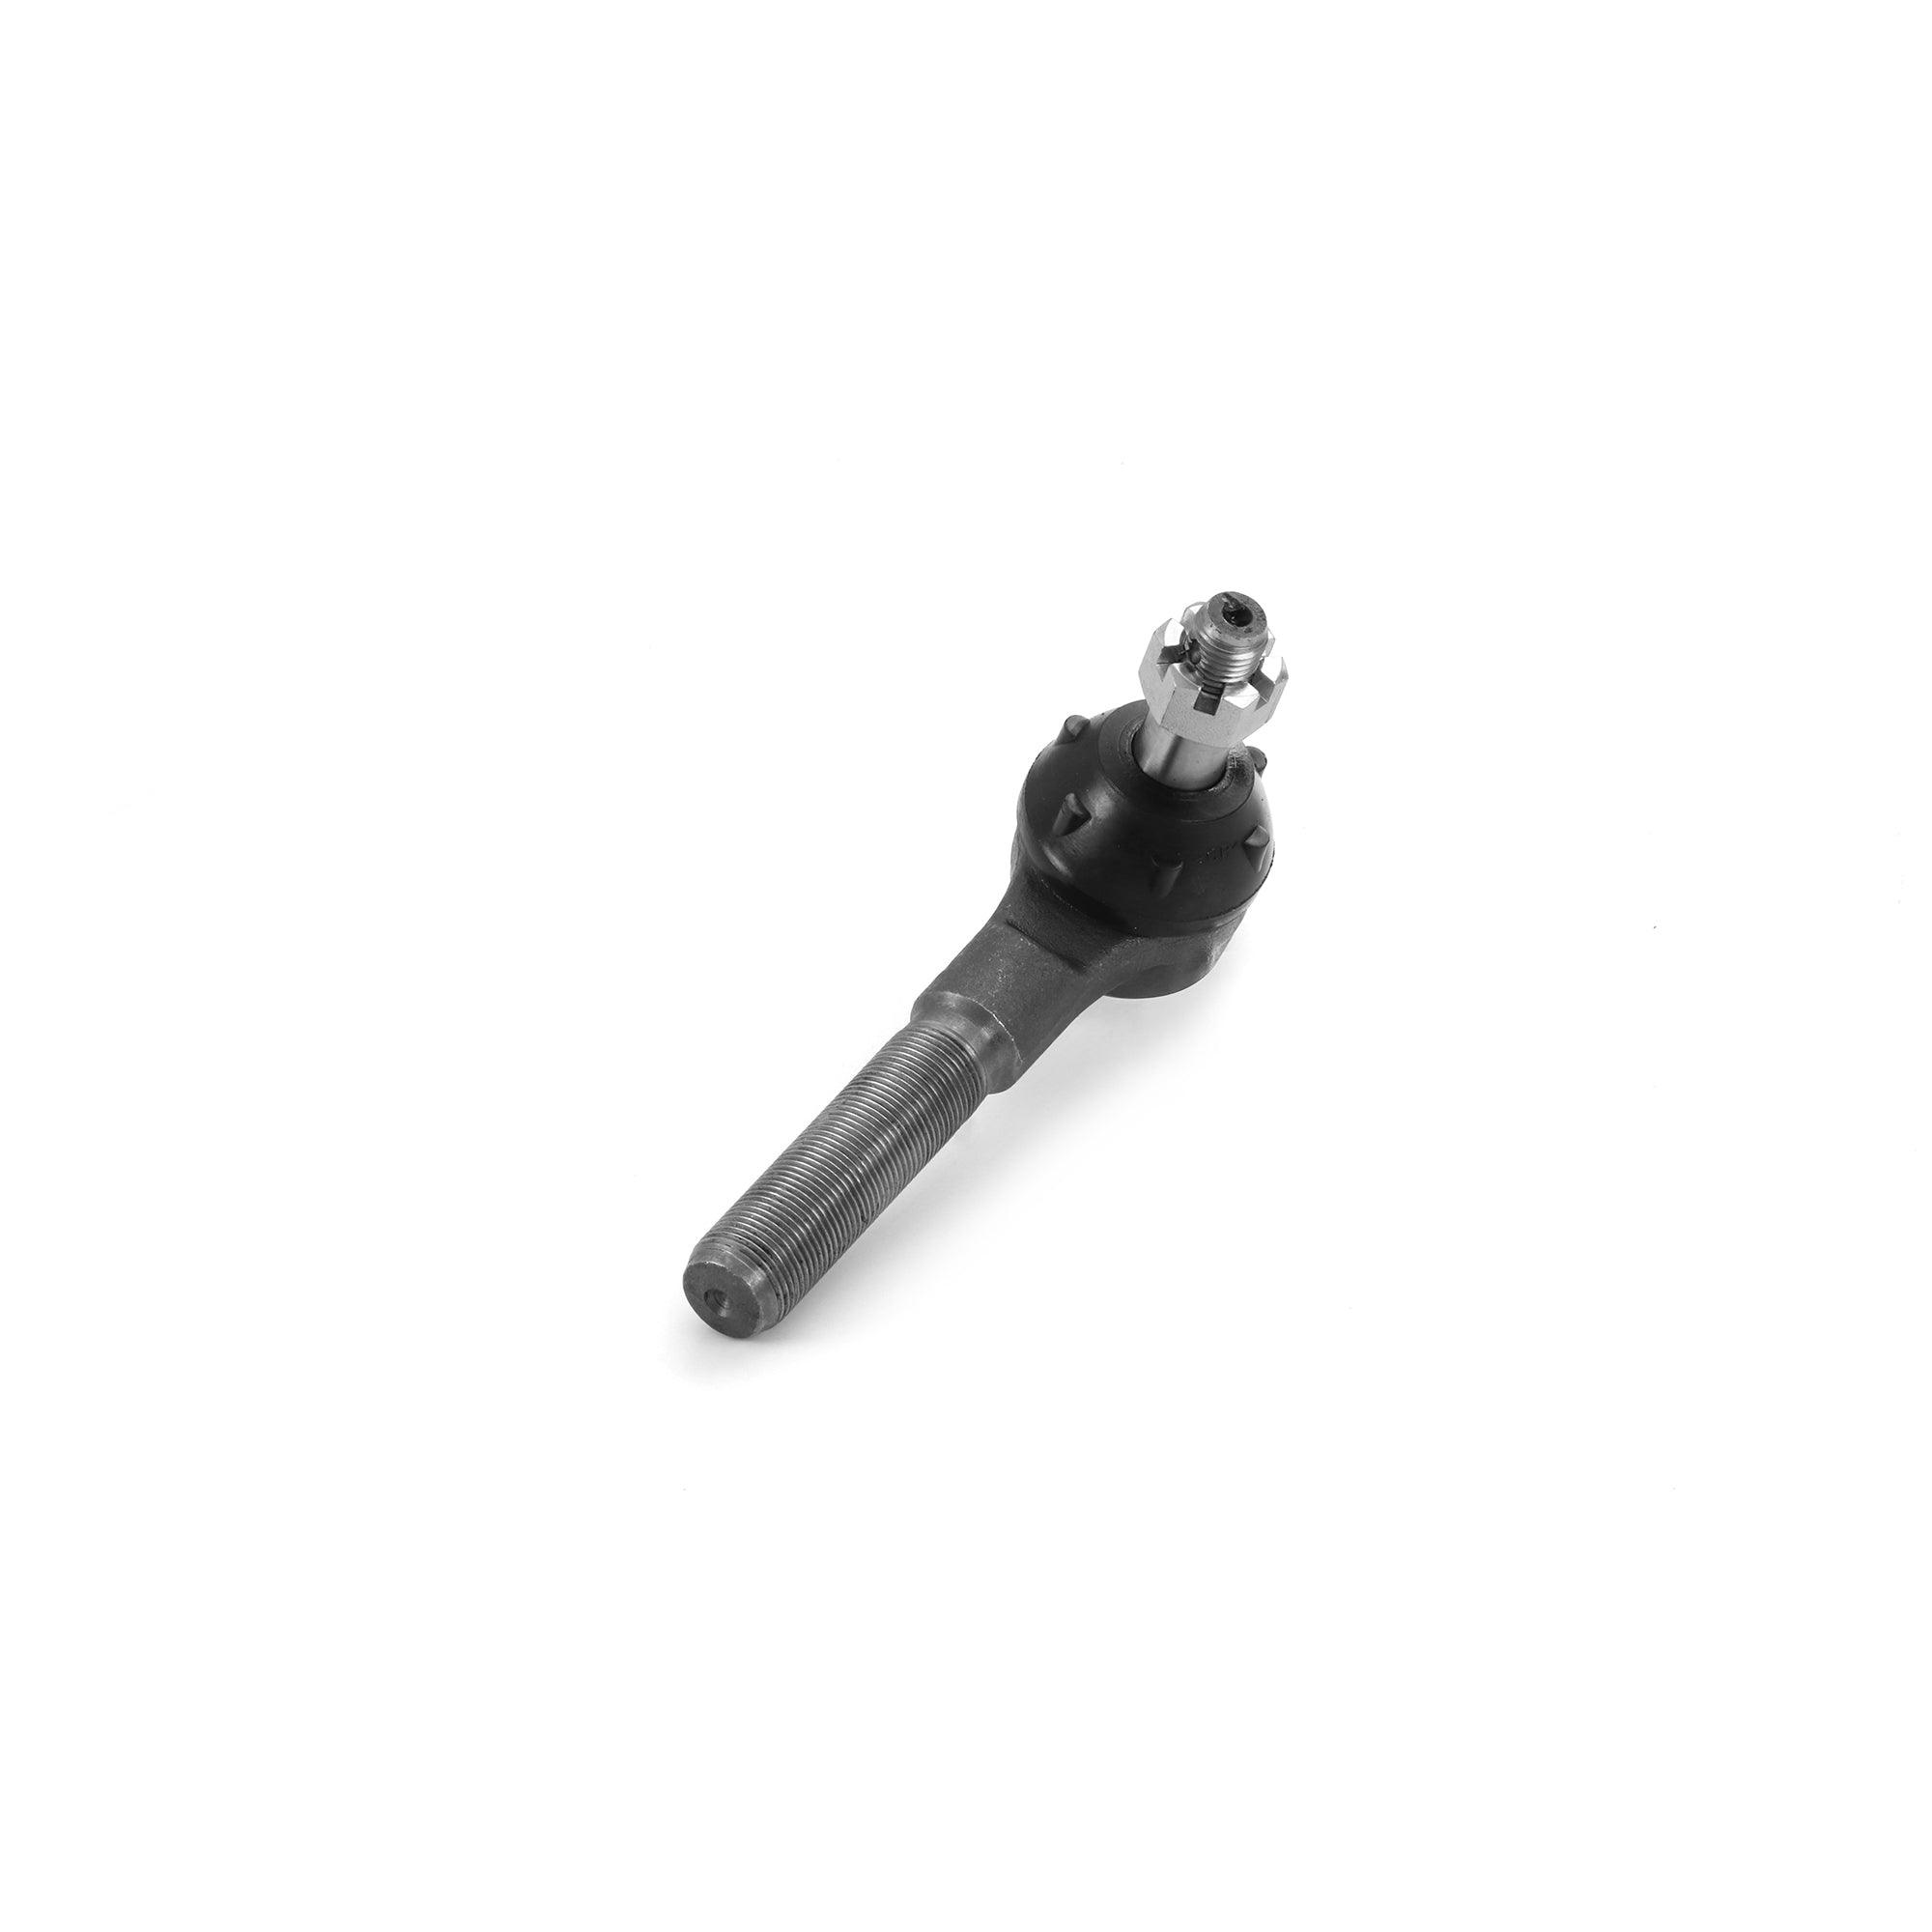 Right Outer Tie Rod End 39723MT - Metrix Premium Chassis Parts